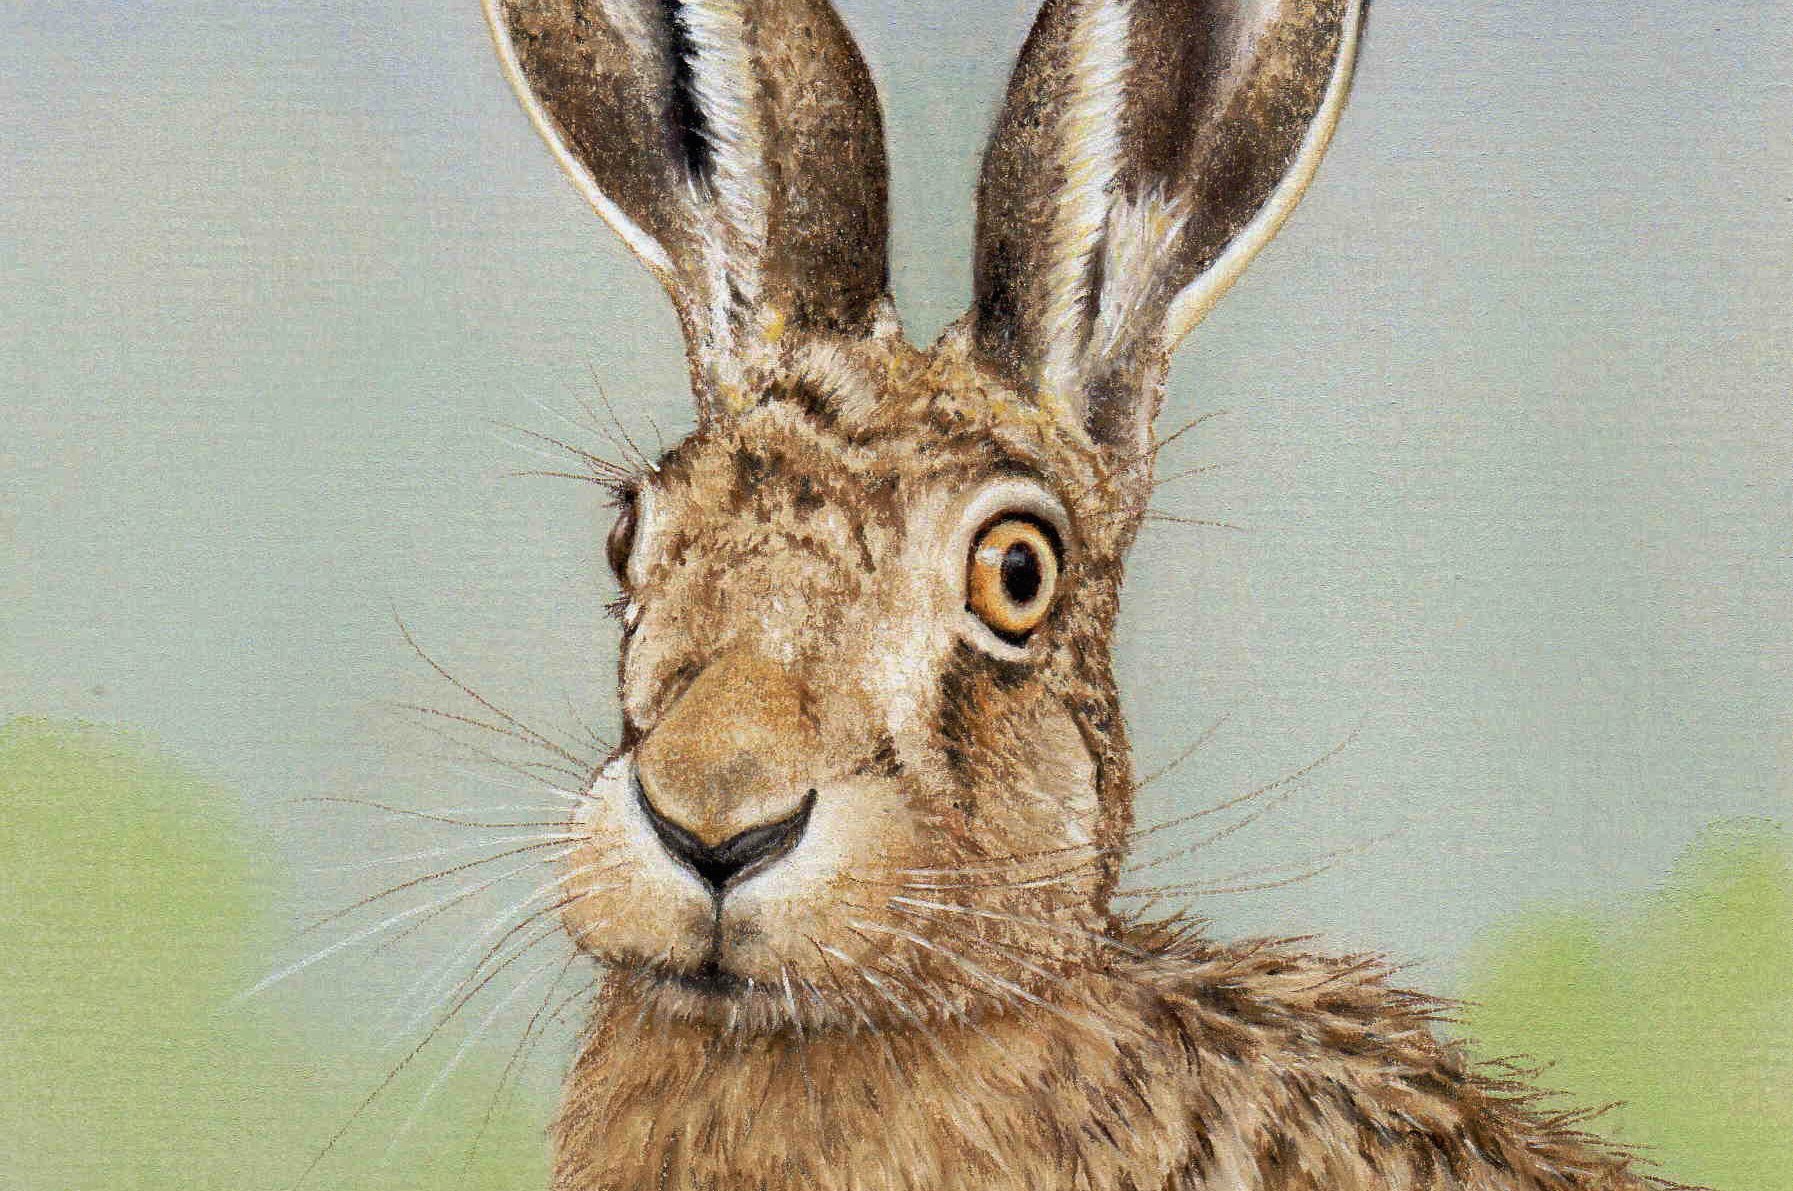 Drawing a Hare in Pastel Pencils - YouTube